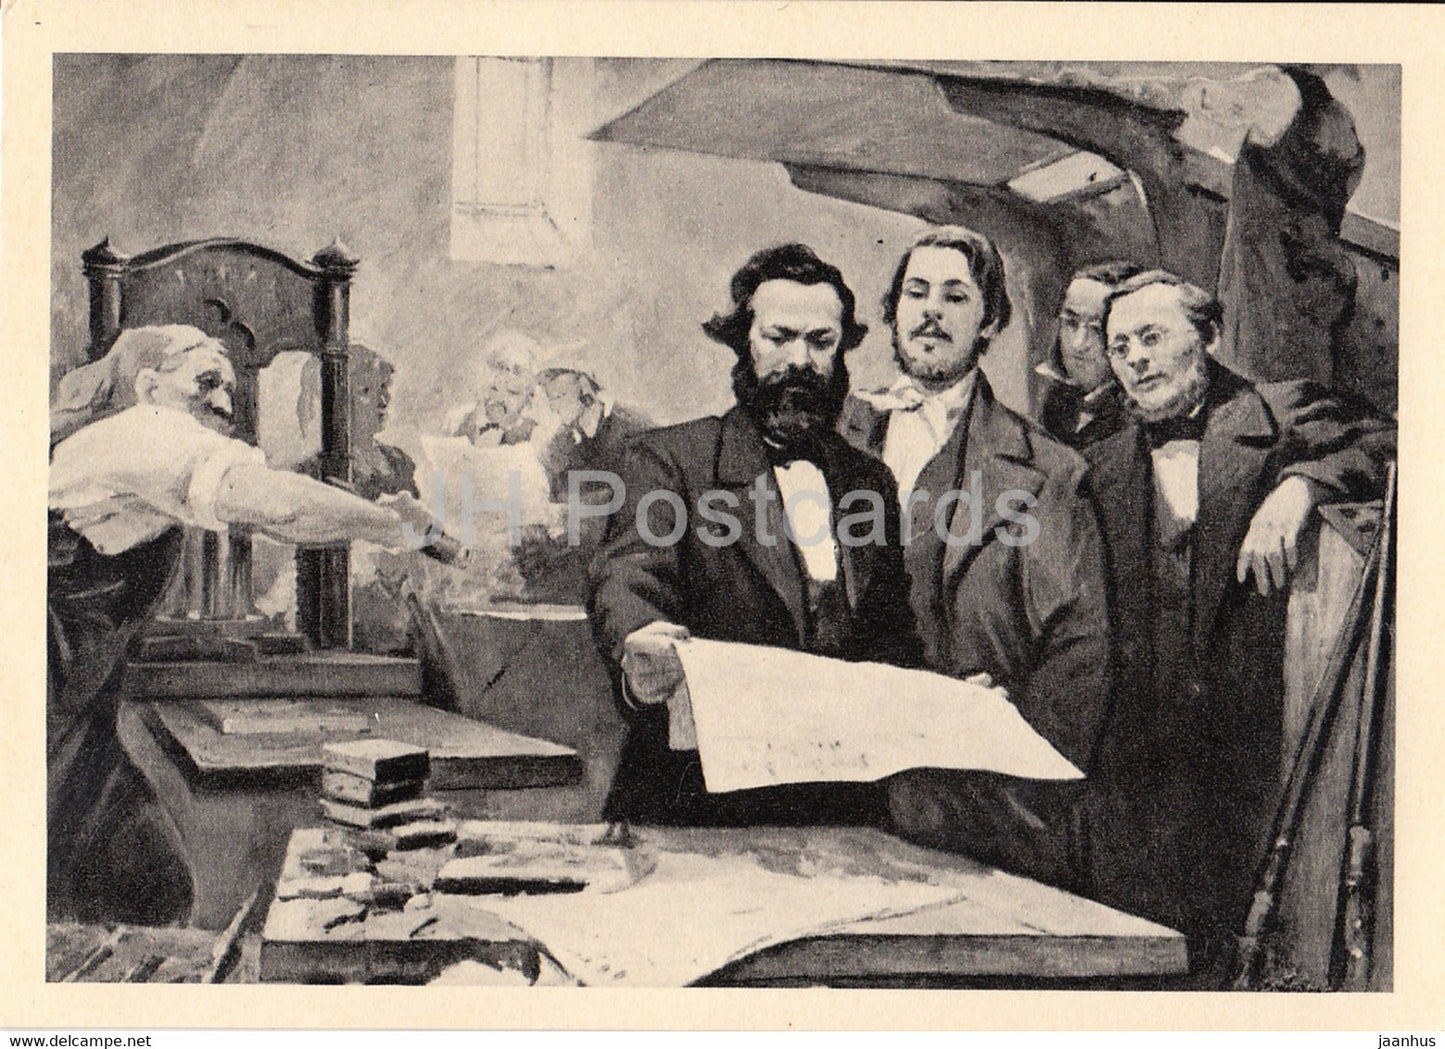 Karl Marx and Friedrich Engels at the printing house of the New Rhine Newspaper - 1967 - Russia USSR - unused - JH Postcards